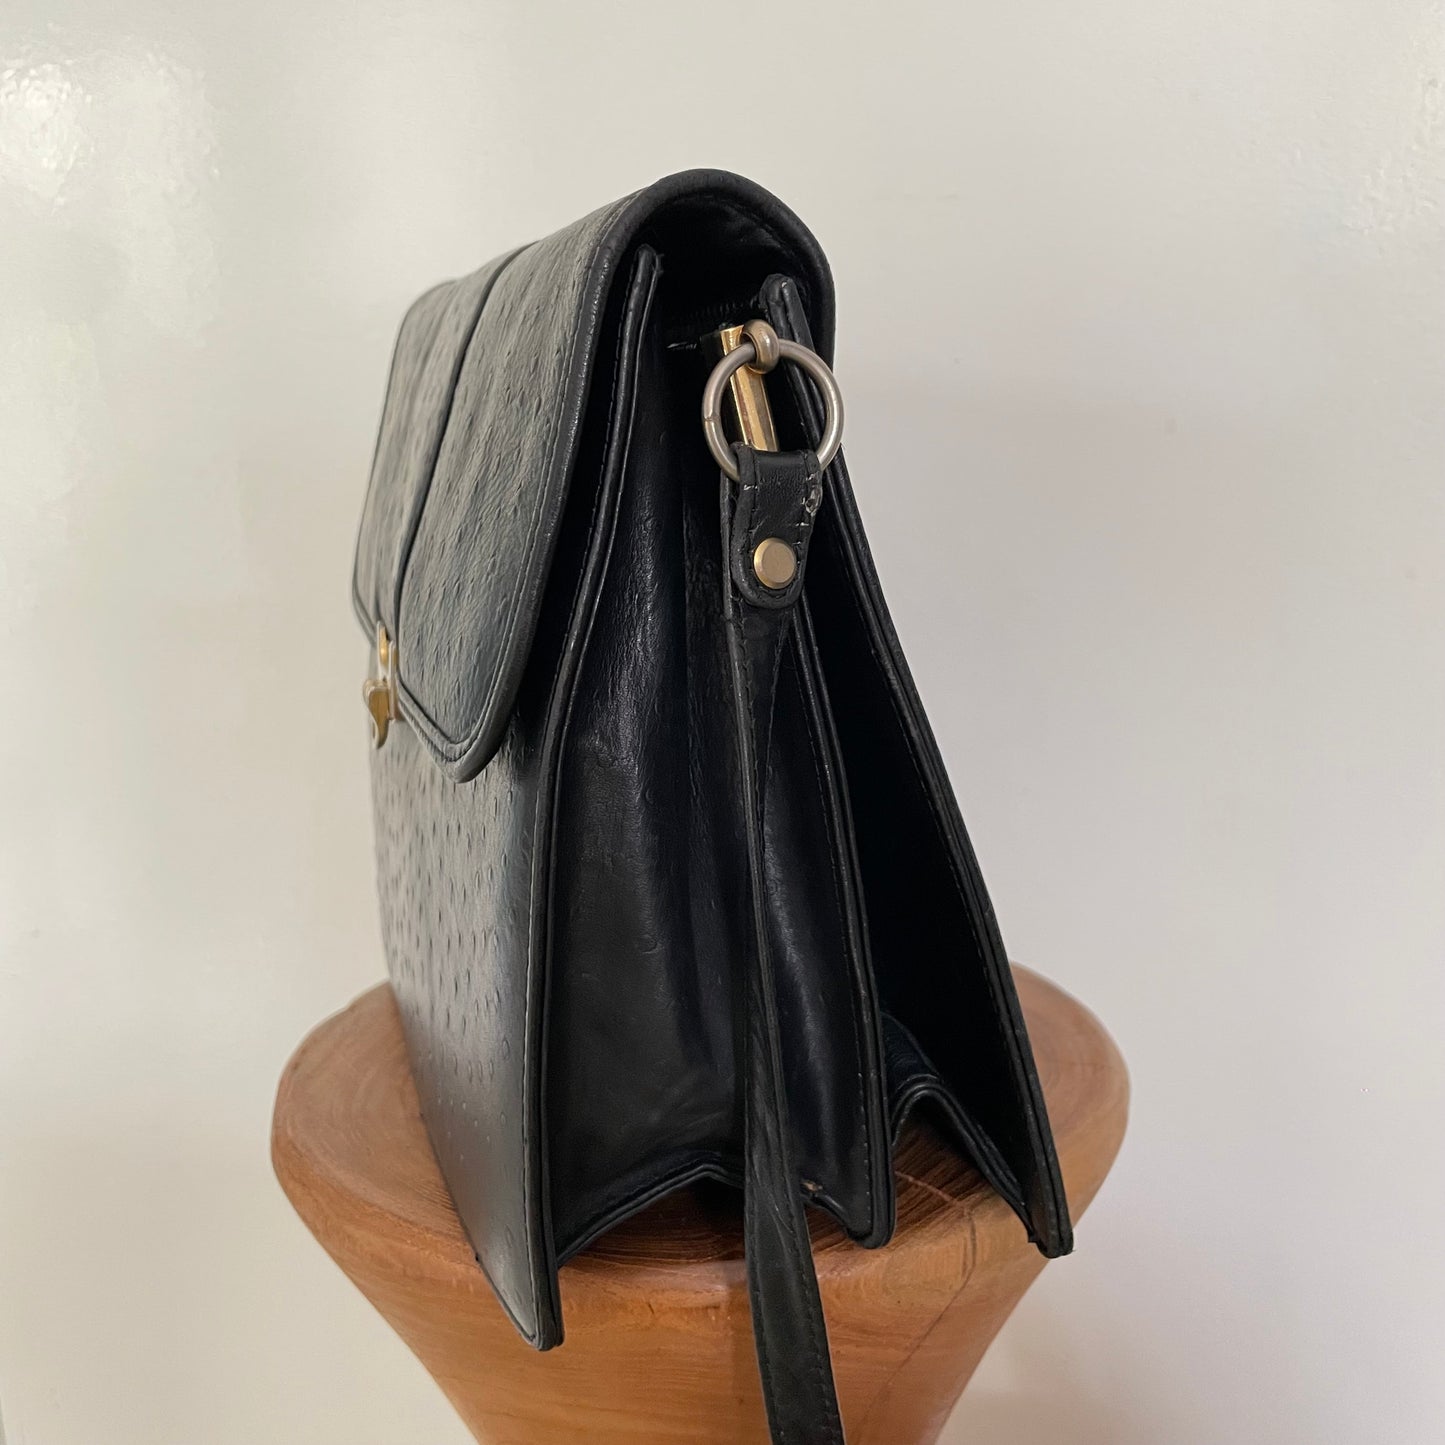 Vintage 1980s black leather bag with detailed front gold clasp